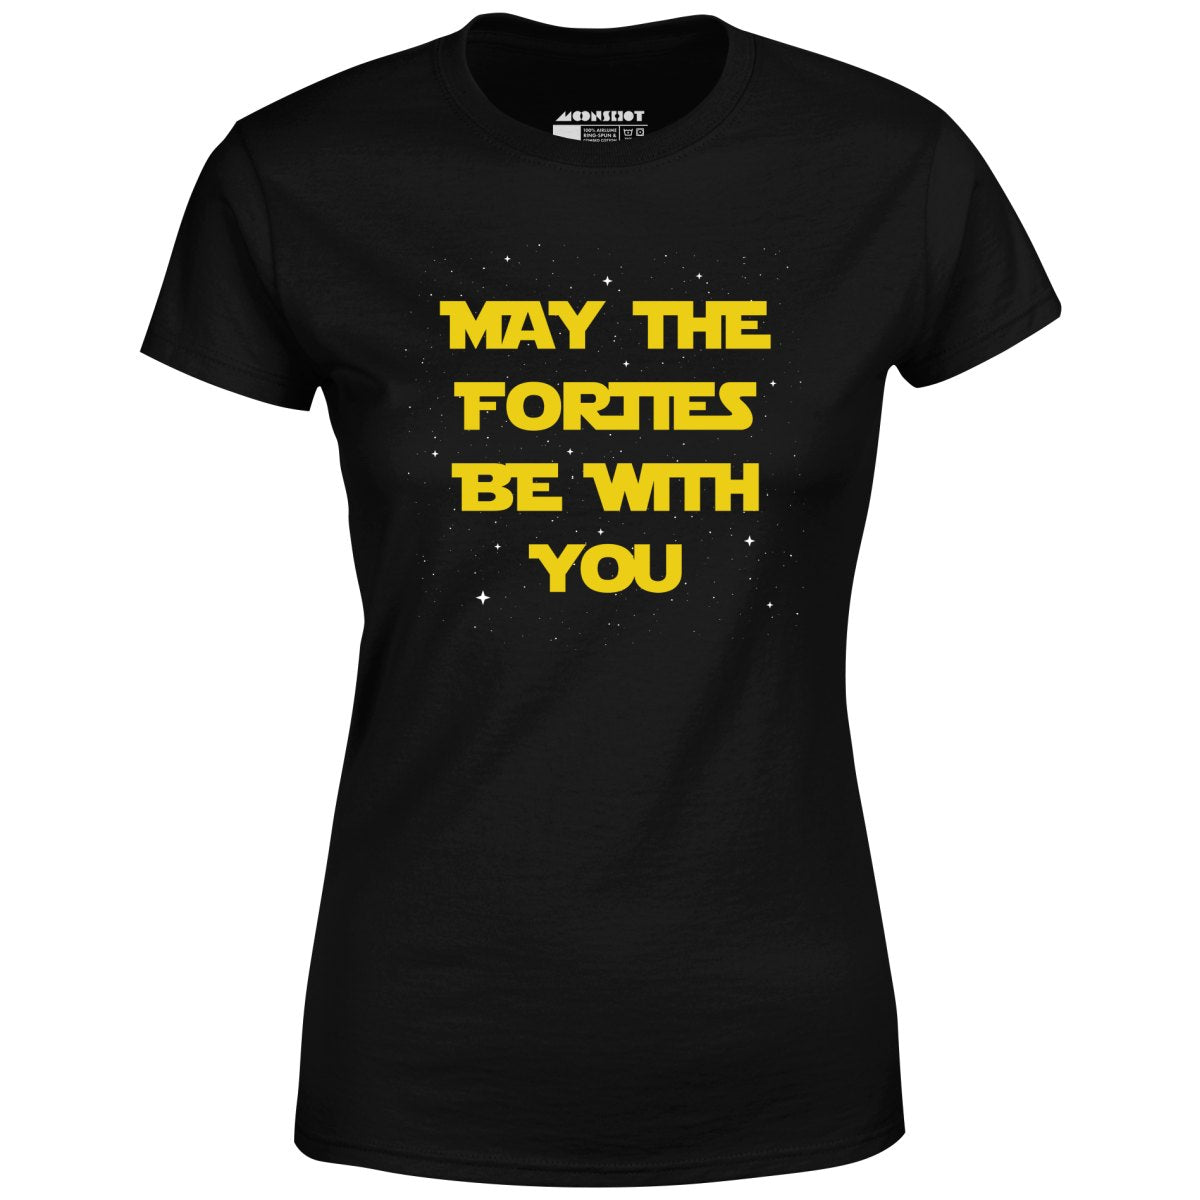 May The Forties Be With You - Women's T-Shirt